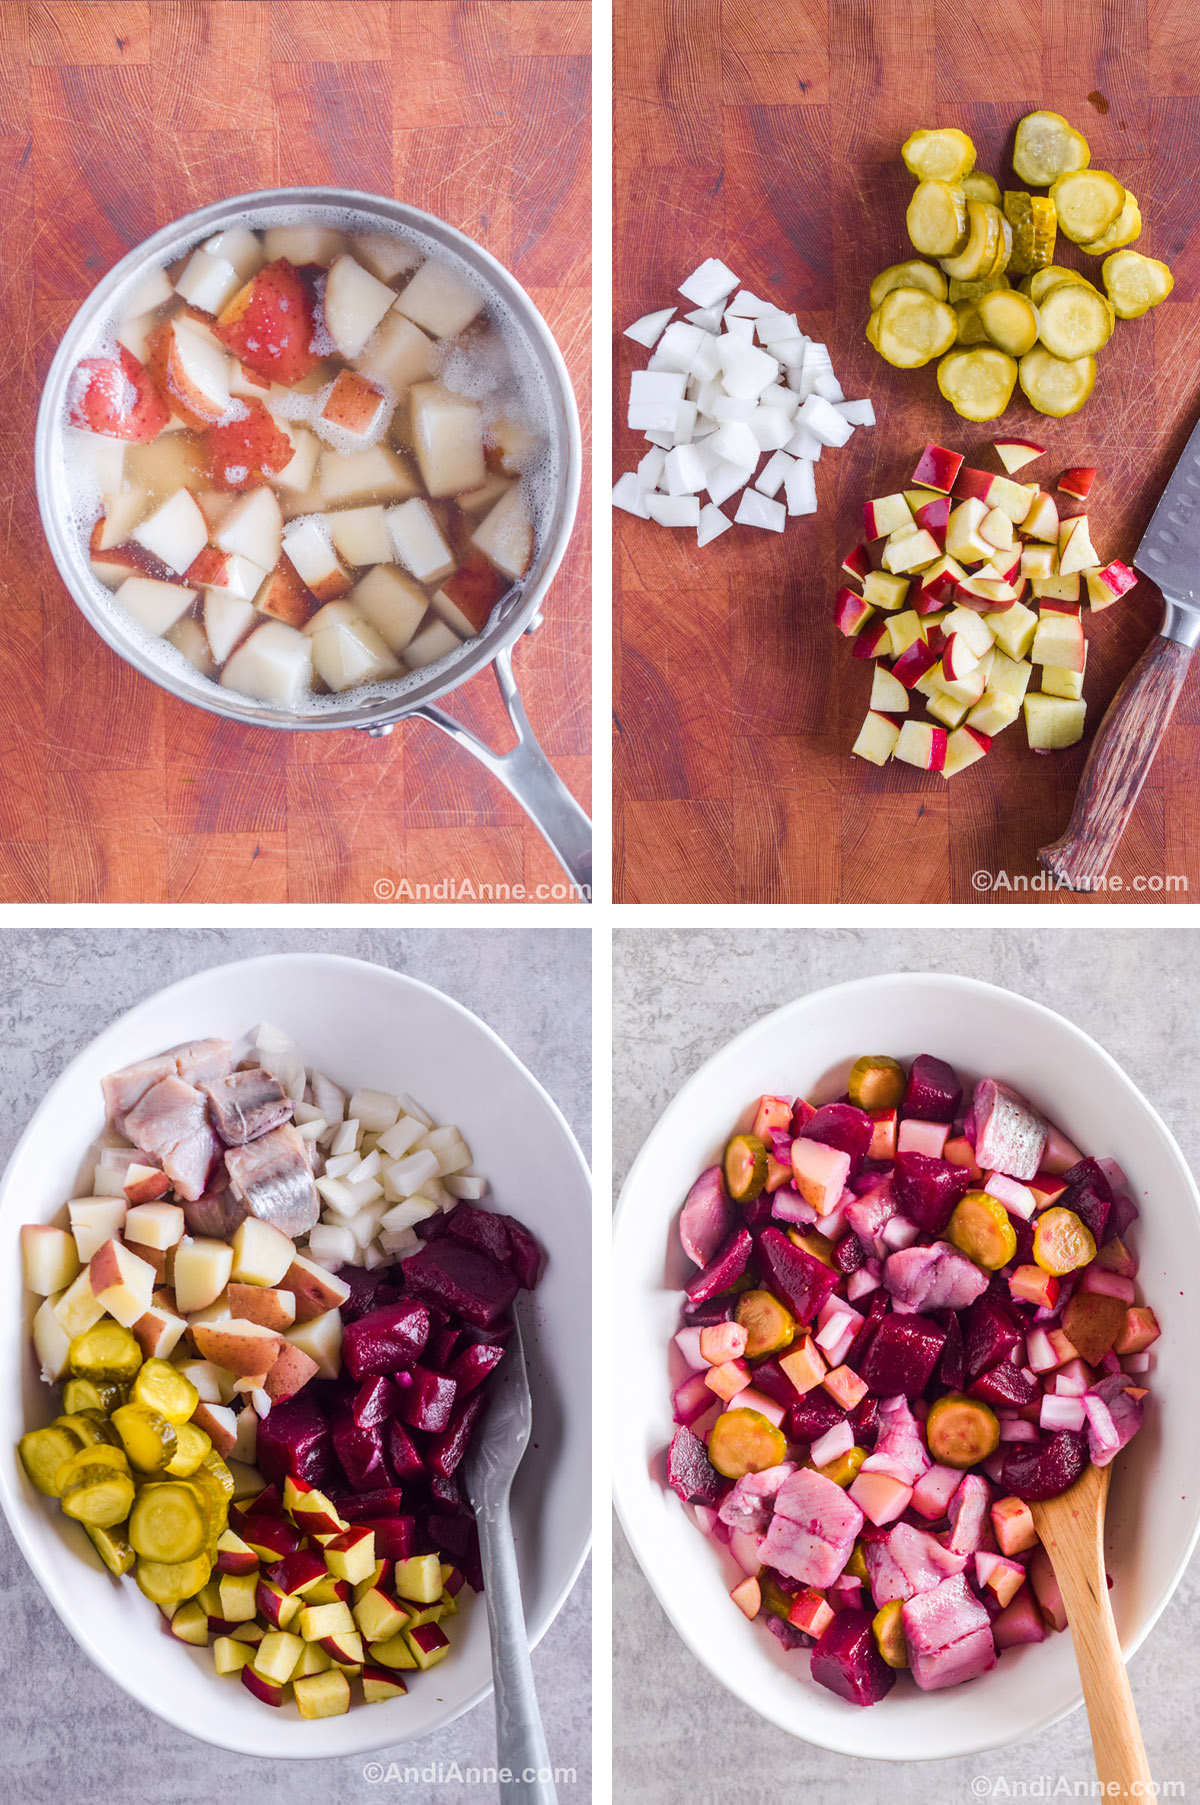 Four images together: A pot of boiled potatoes in water. Chopped onion, apple and pickles with a knife. A bowl with chopped herring, onion, apples, potatoes, beets and pickles. And mixed ingredients with a pinkish hue from beets all in a white bowl together.